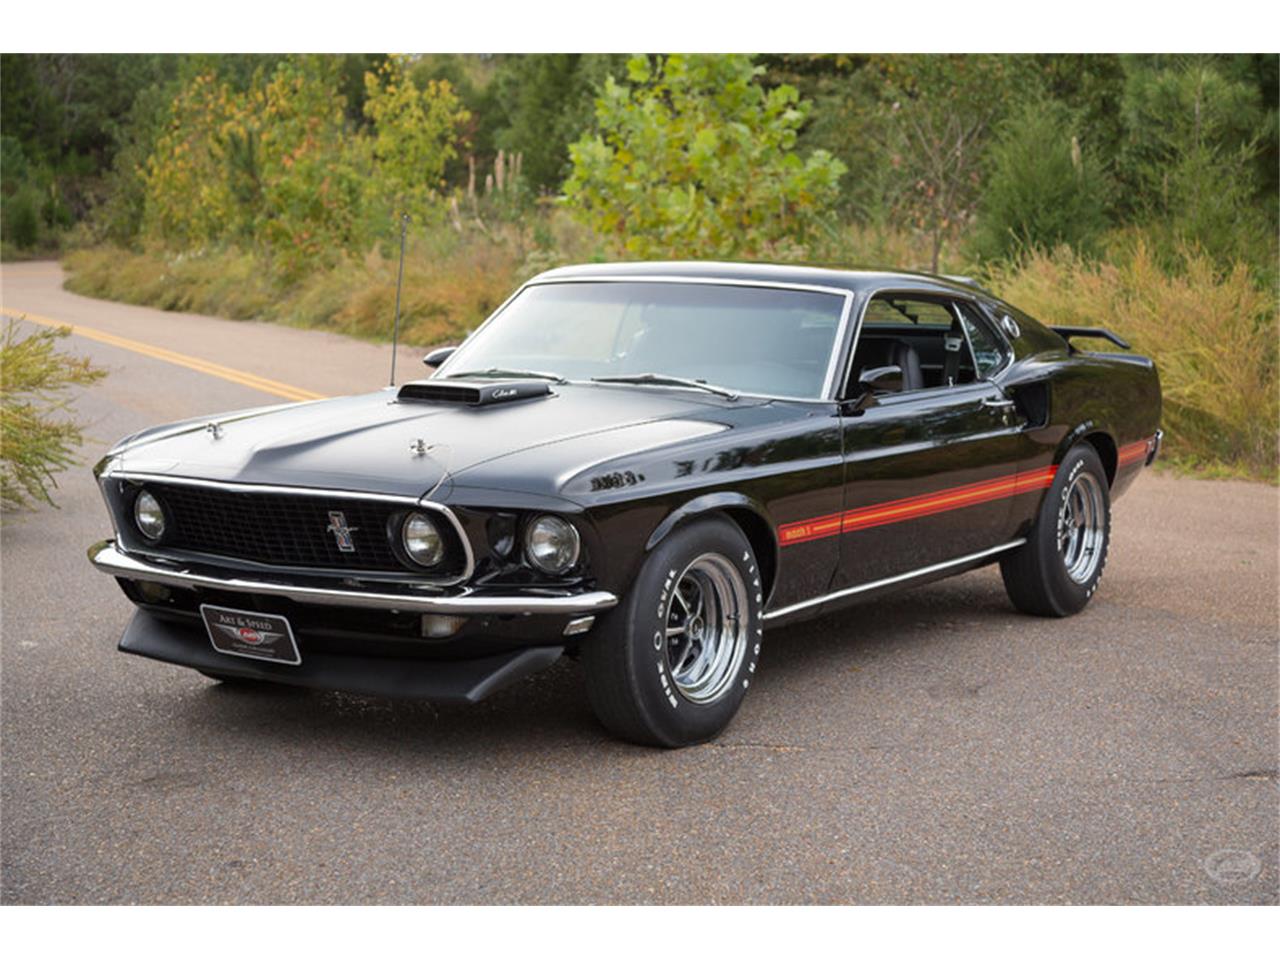 1969 Ford Mustang 428 Super Cobra Jet Ram Air for Sale | ClassicCars ...